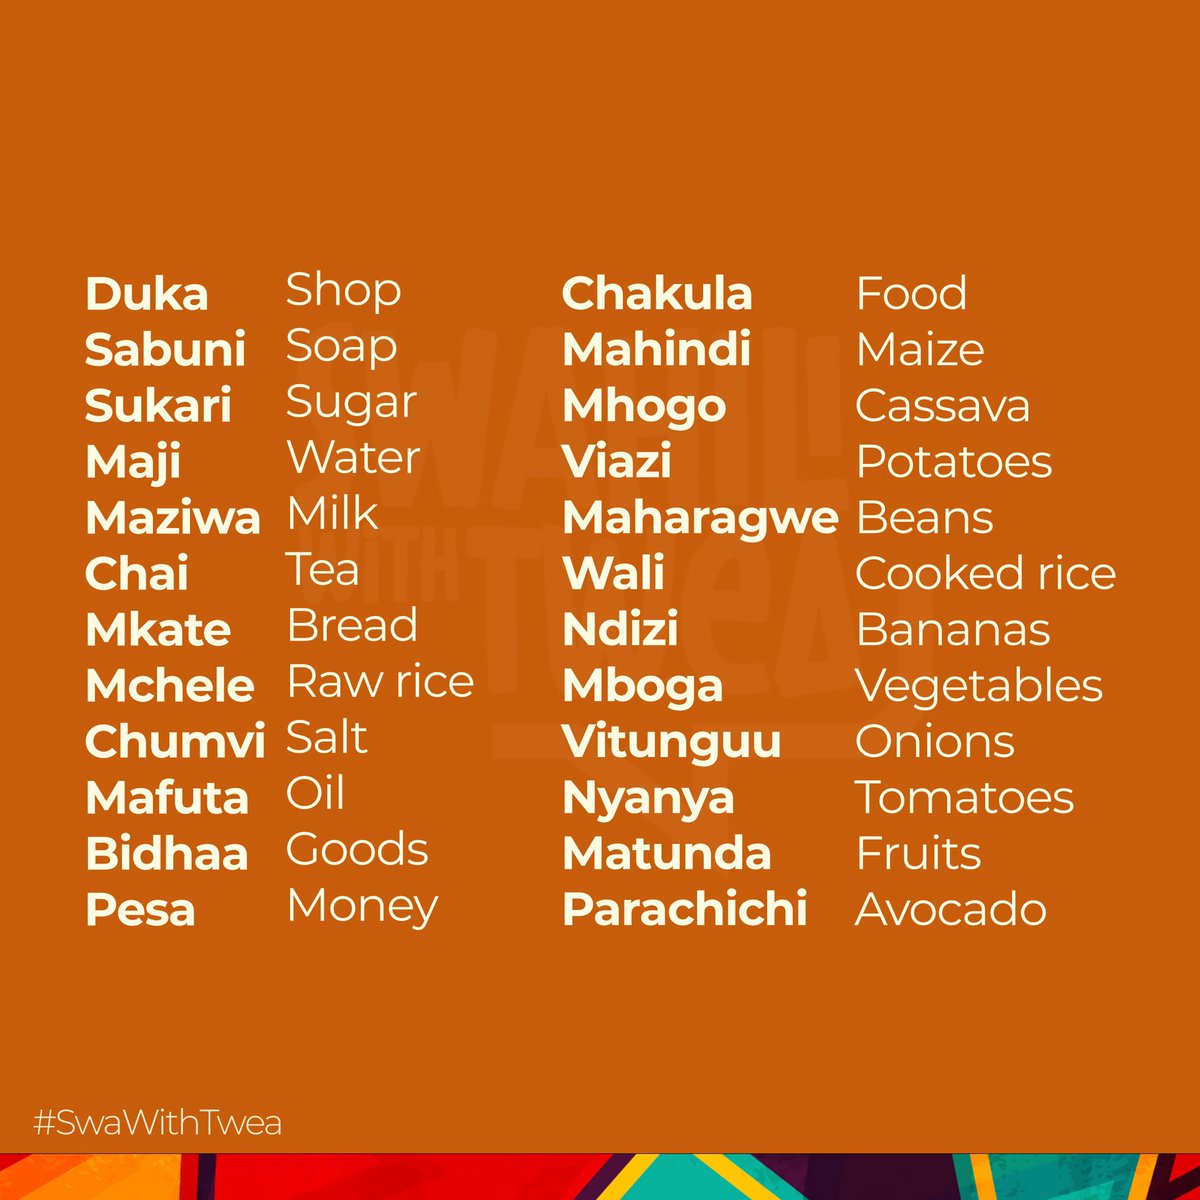 Hamjambo 
Common nouns in #Swahili 
For beans, it can be “maharagwe or maharage”
#SwaWithTwea